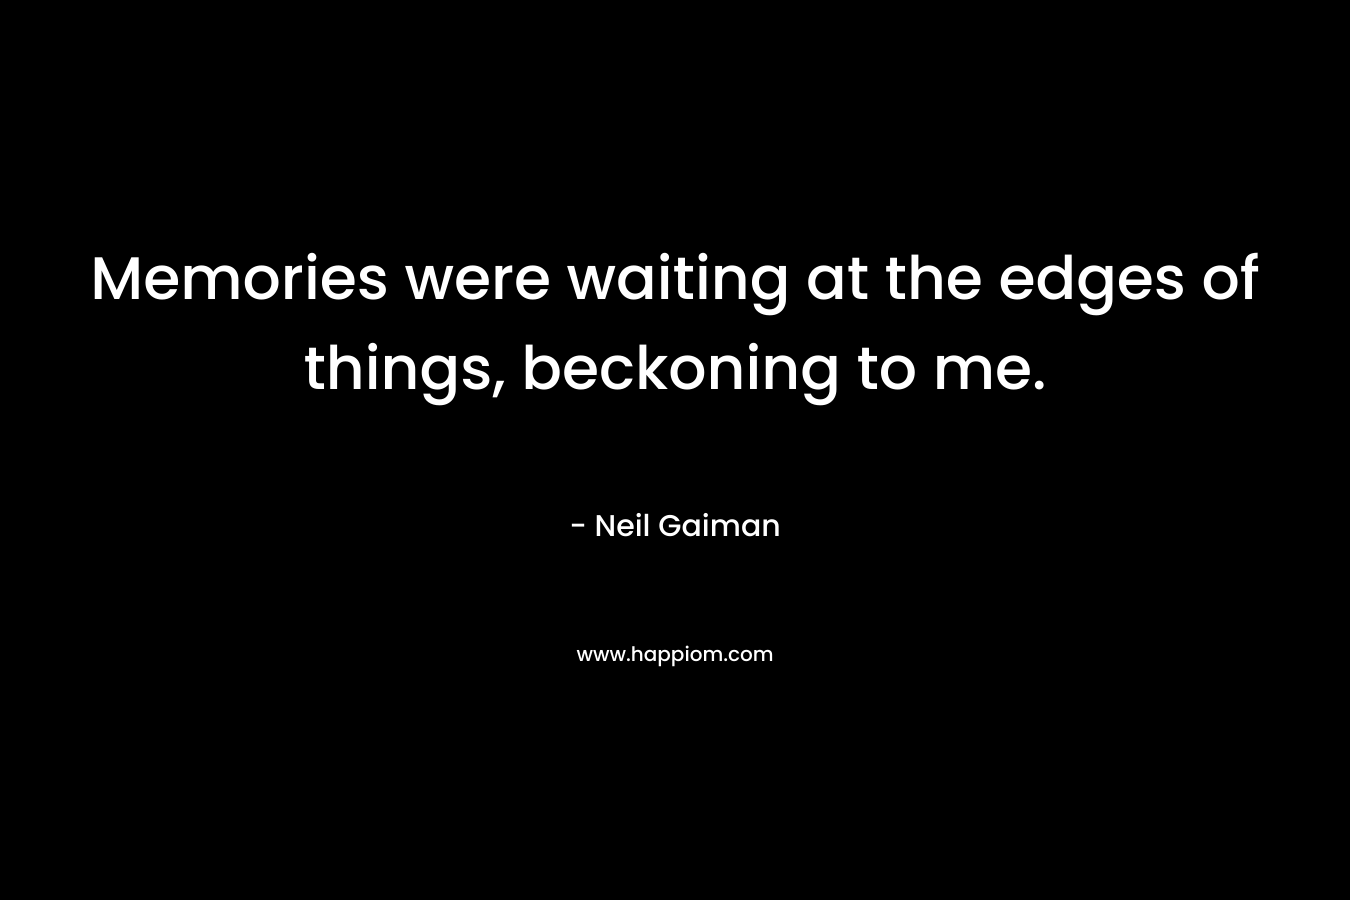 Memories were waiting at the edges of things, beckoning to me. – Neil Gaiman